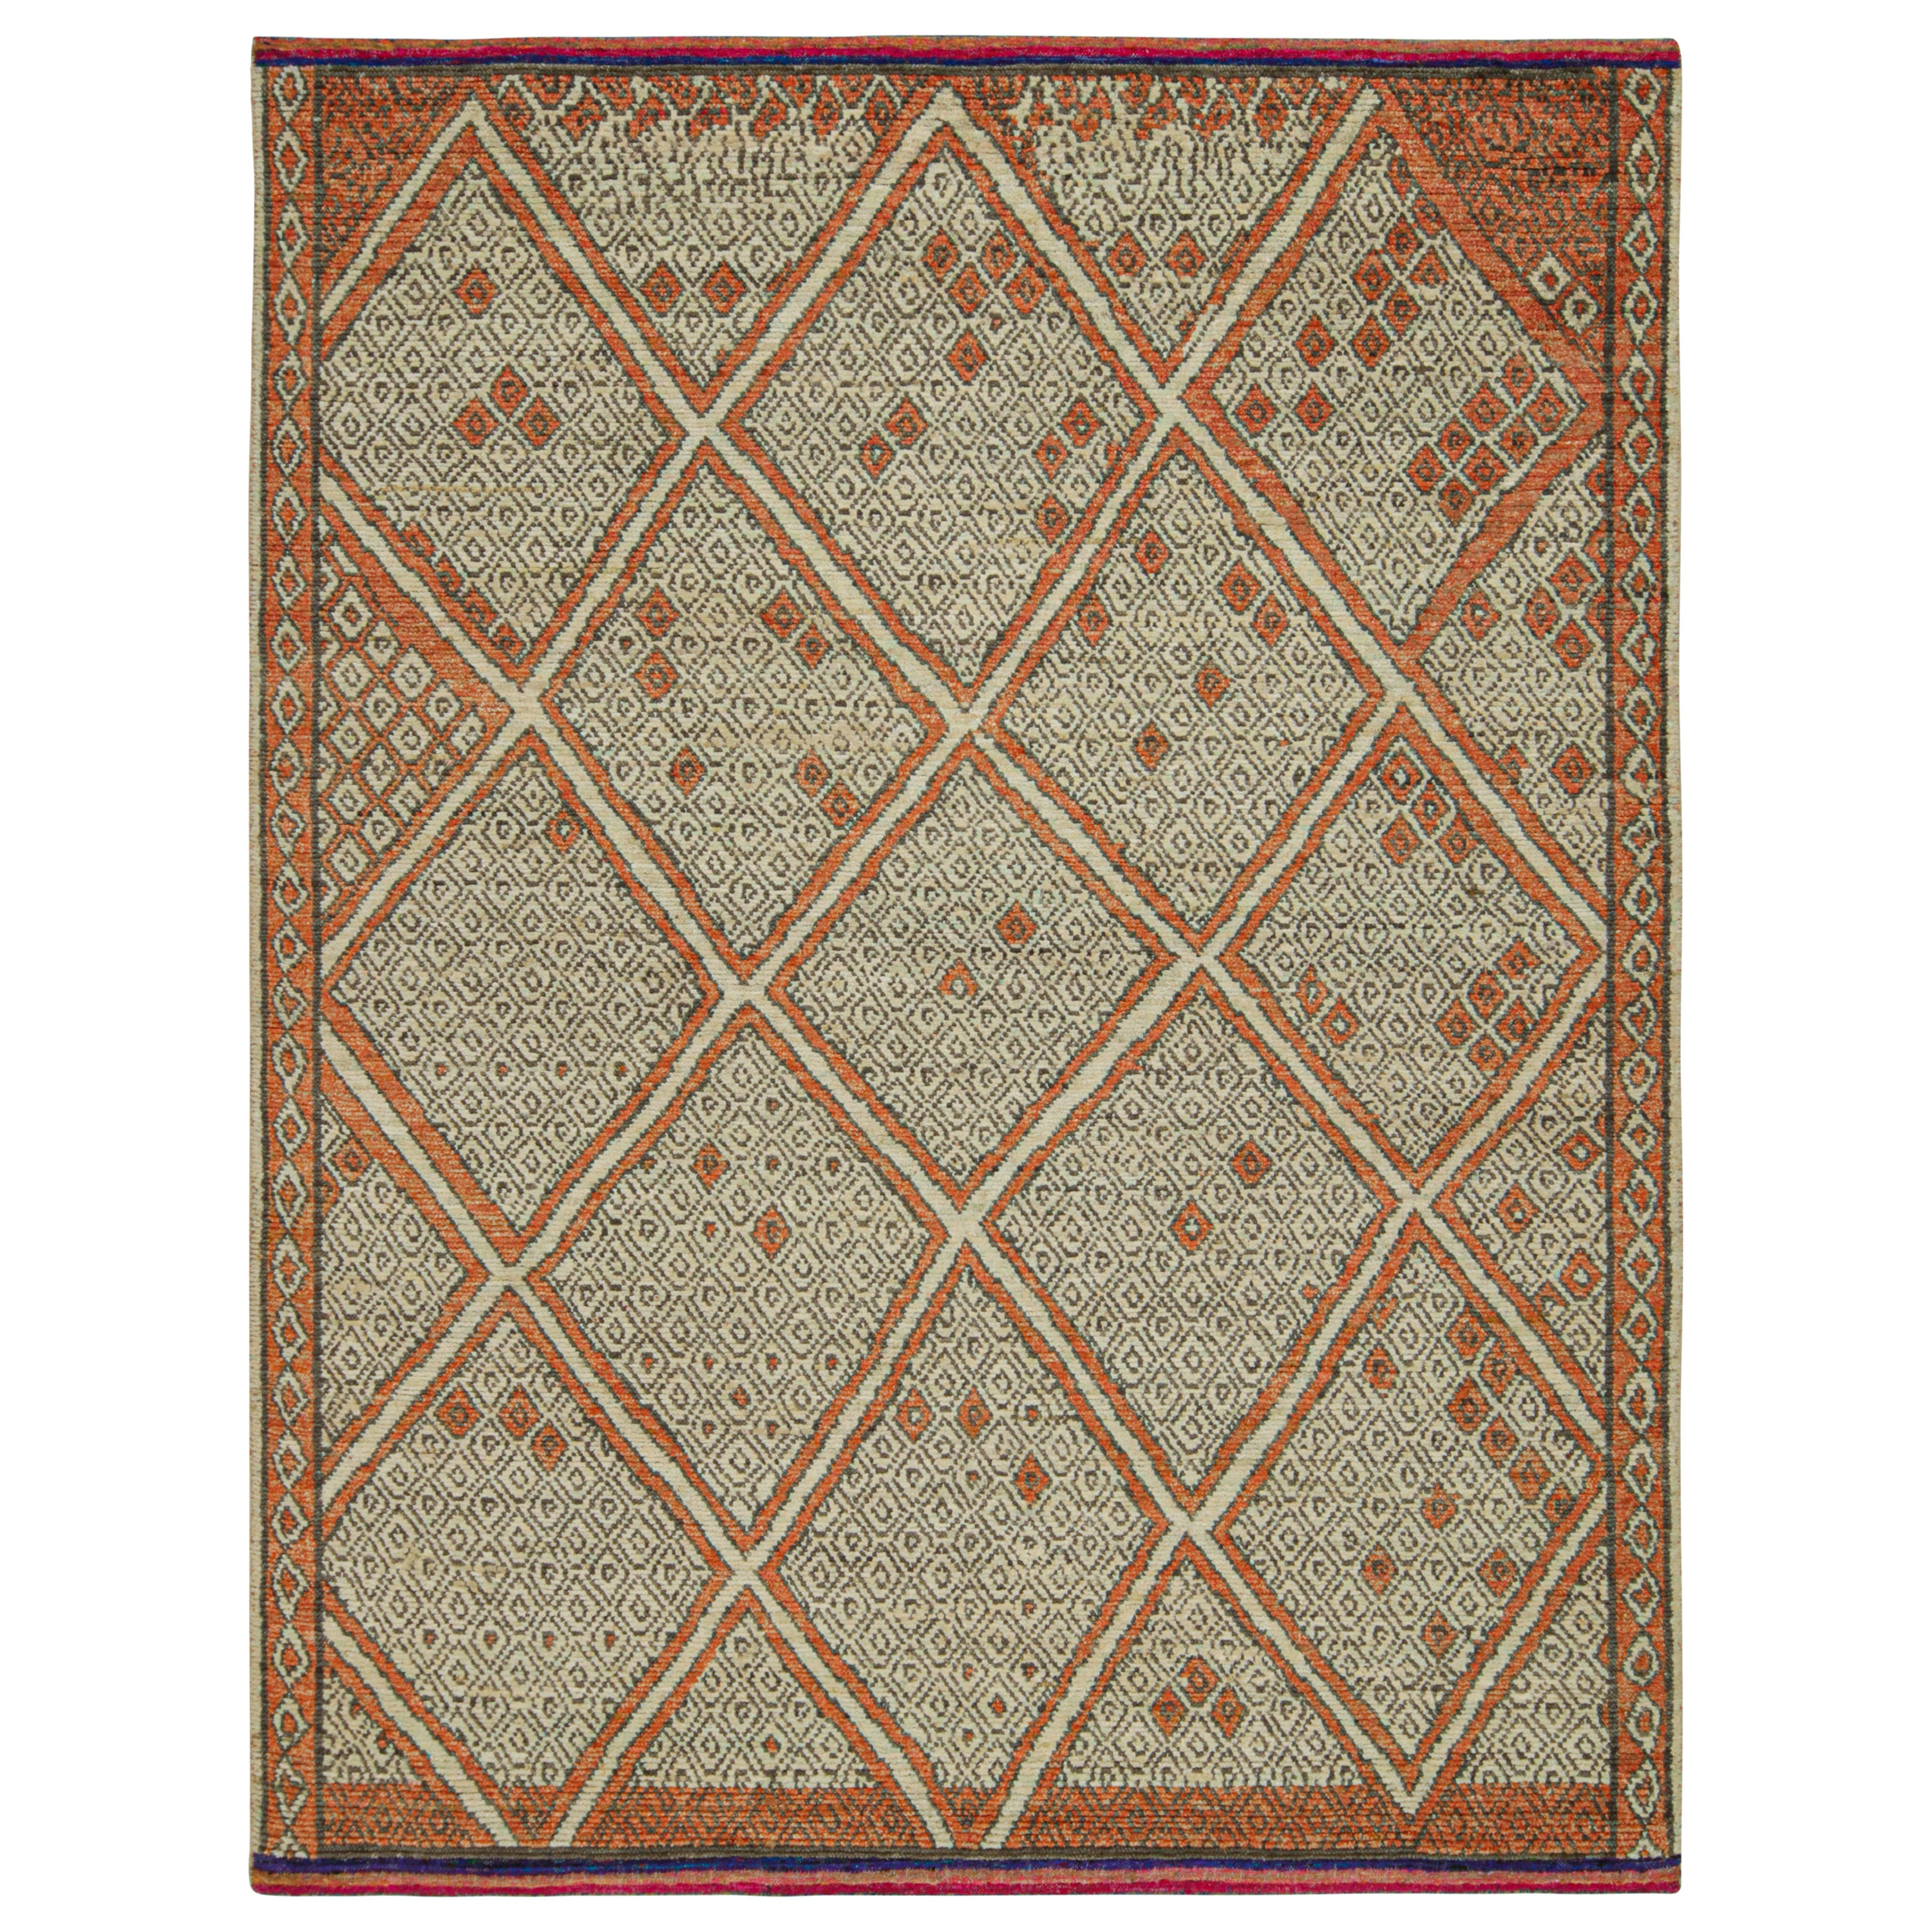 Rug & Kilim’s Moroccan Style Rug in Rust with Beige and Gray Geometric Pattern